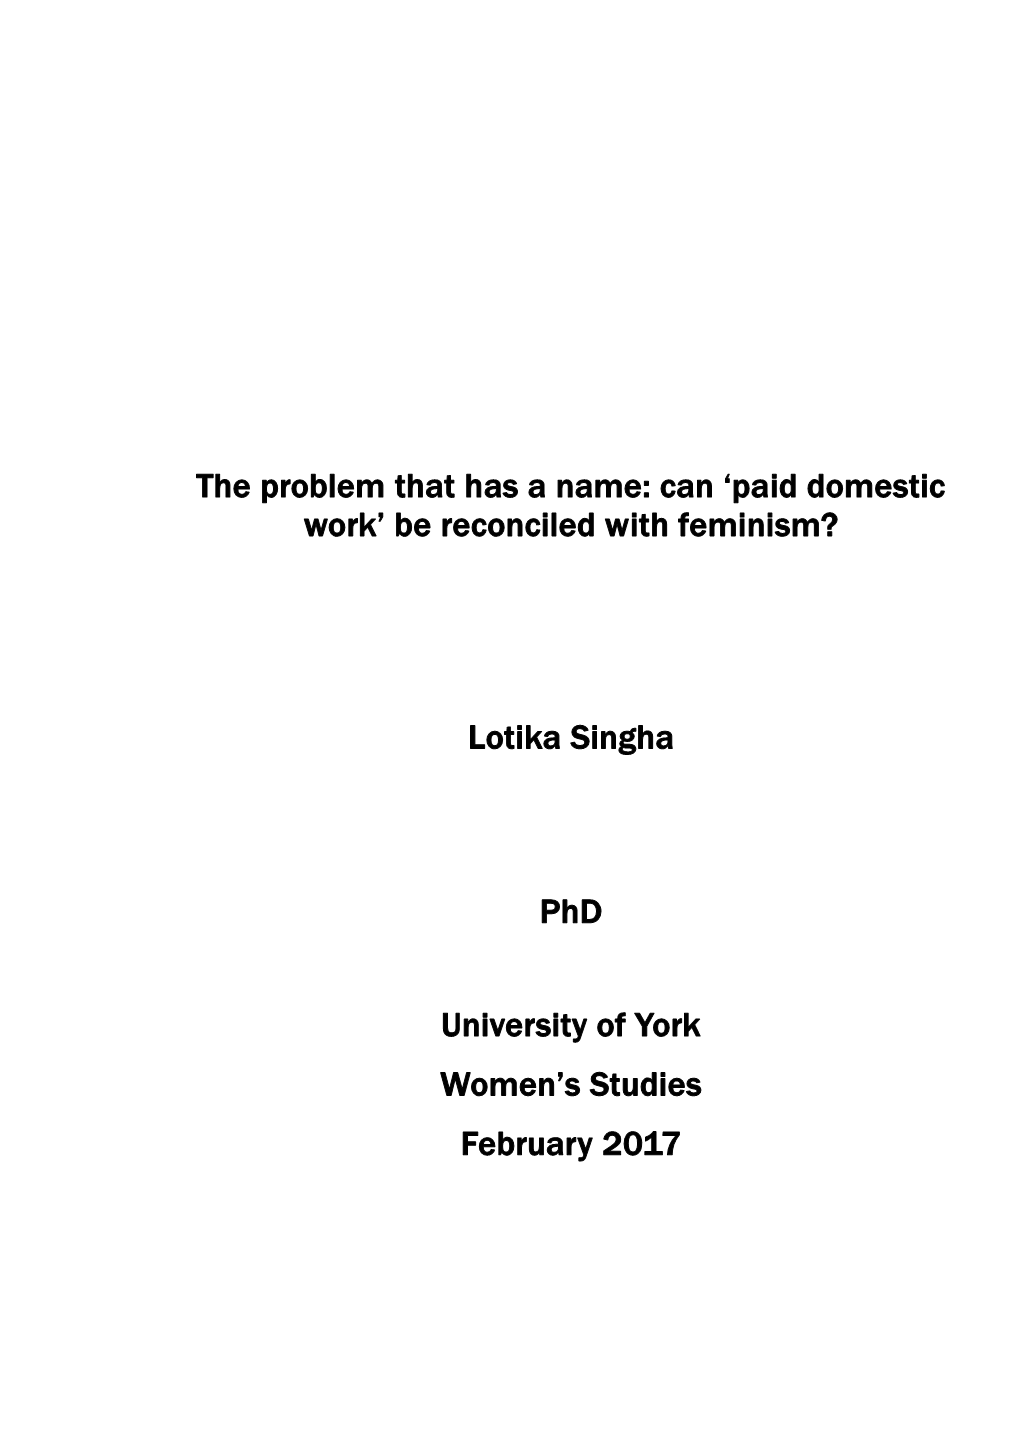 Paid Domestic Work’ Be Reconciled with Feminism?